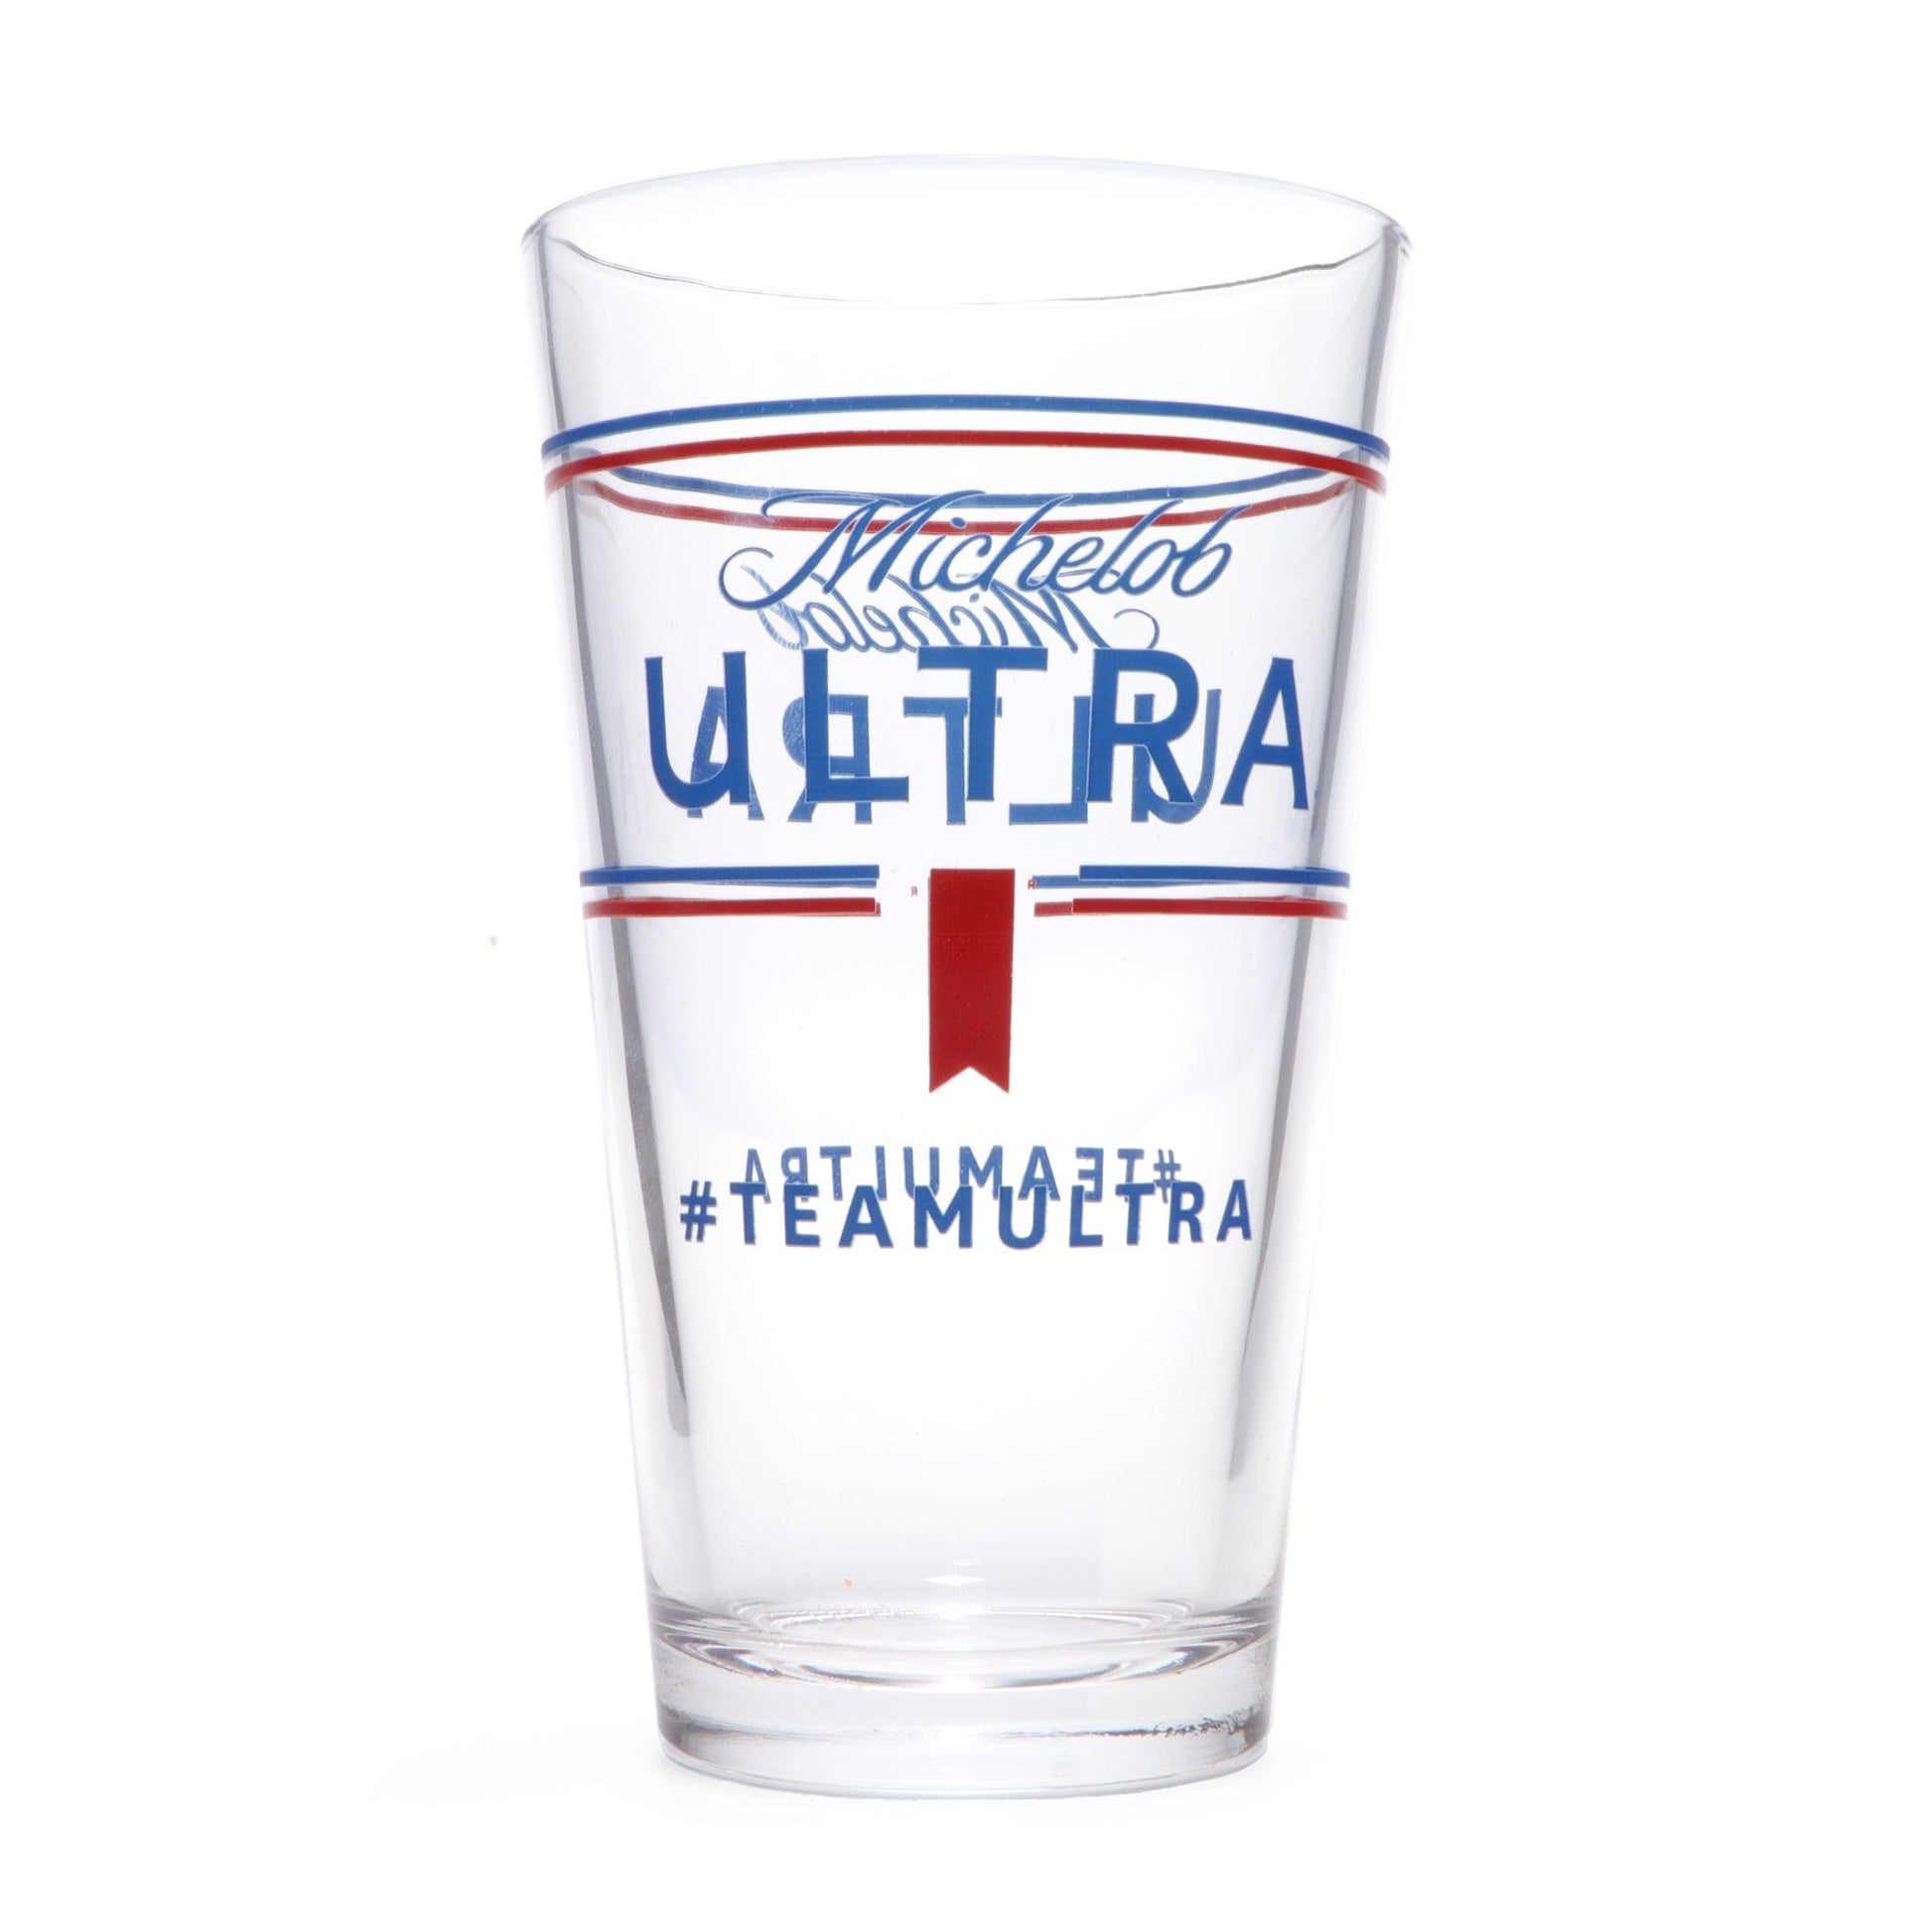 empty 16 oz glass with Michelob ultra logo surrounded by red and blue lines with #teamultra under